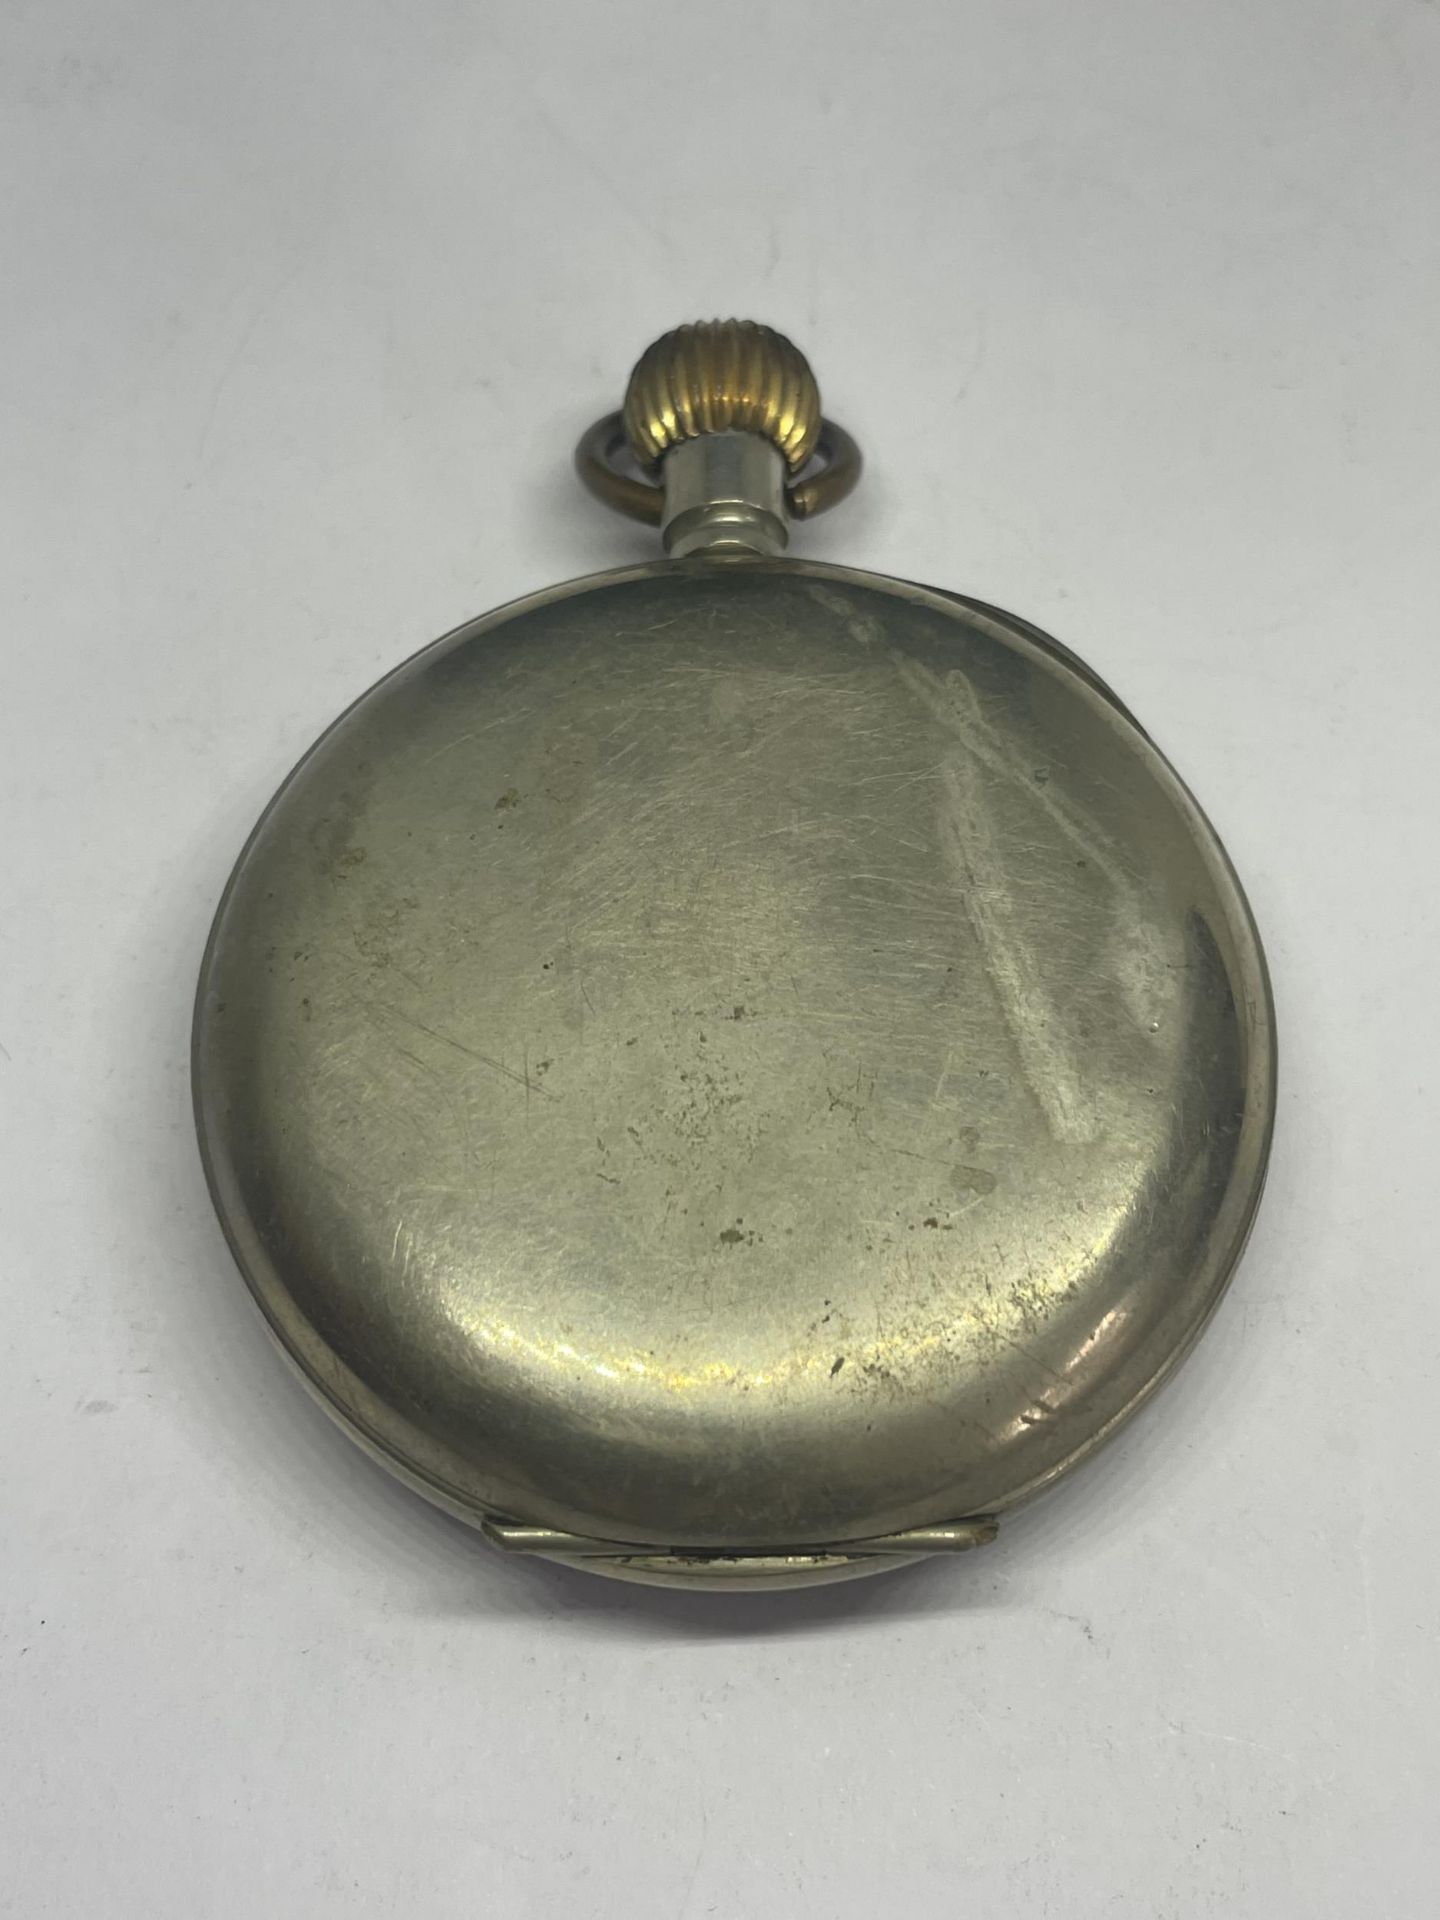 A GOLIATH POCKET WATCH SEEN WORKING BUT NO WARRANTY - Image 2 of 2